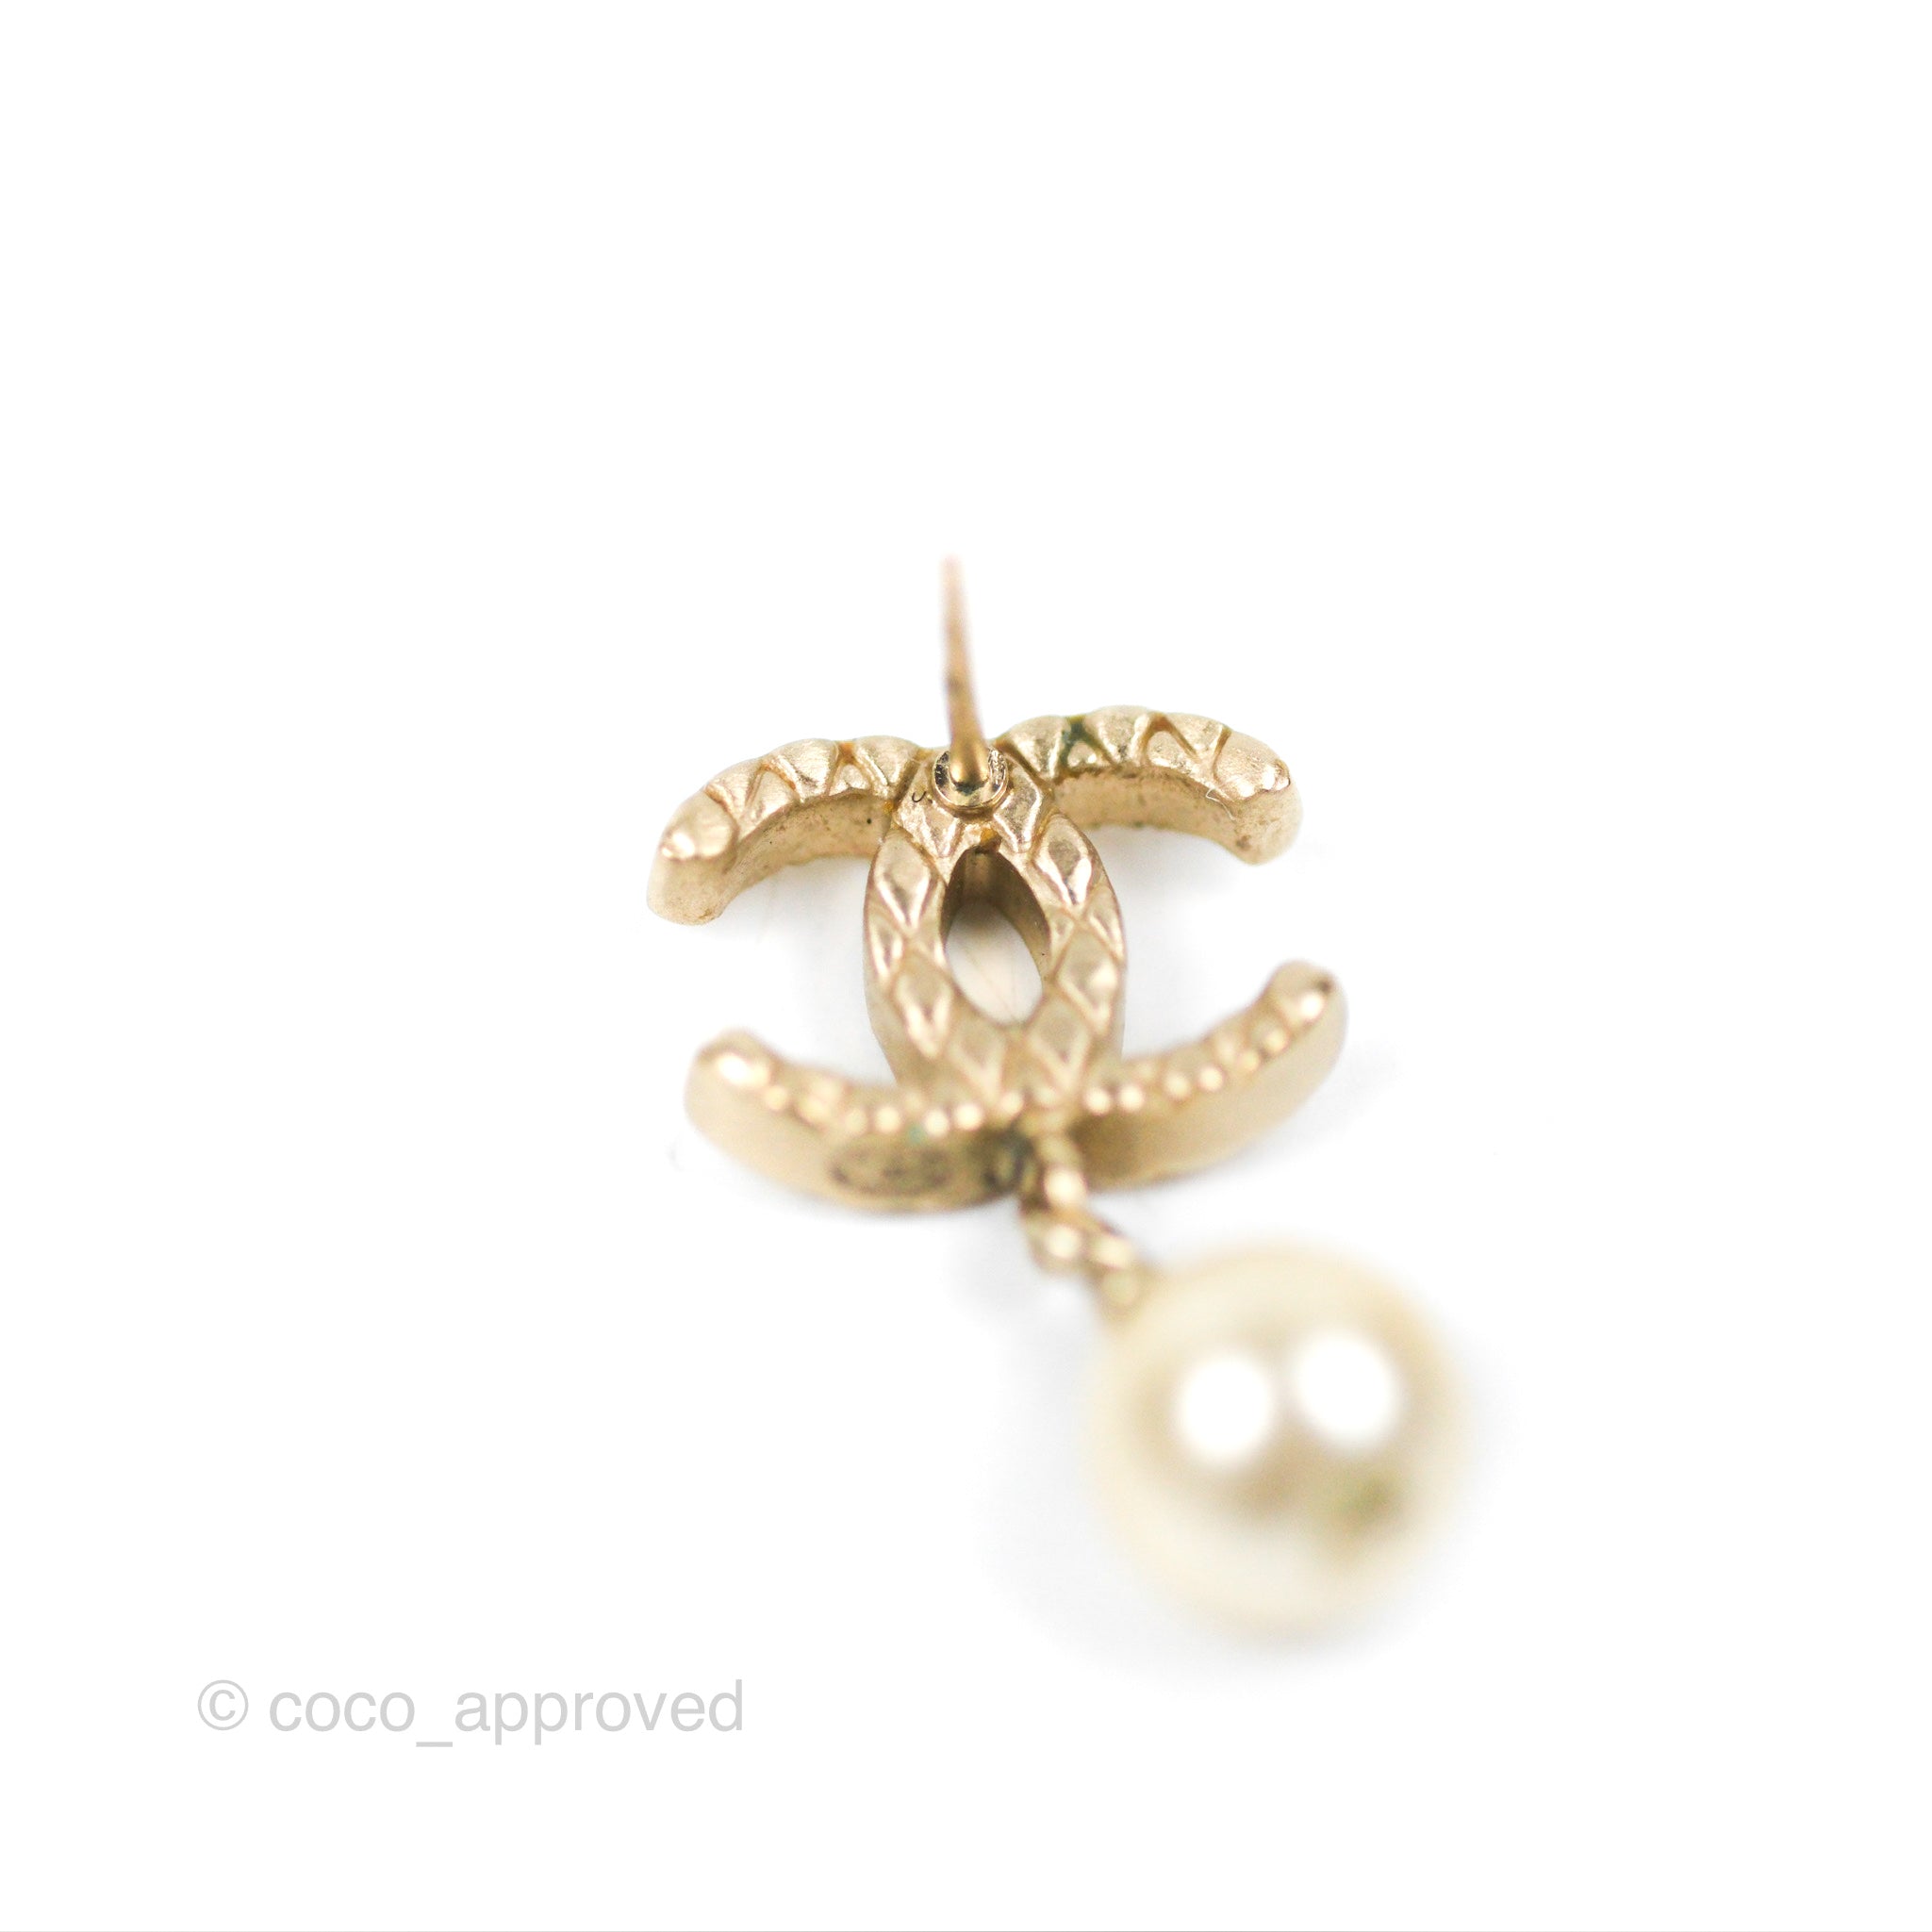 Chanel Crystal CC Drop Pearl Earrings Gold Tone 21V – Coco Approved Studio